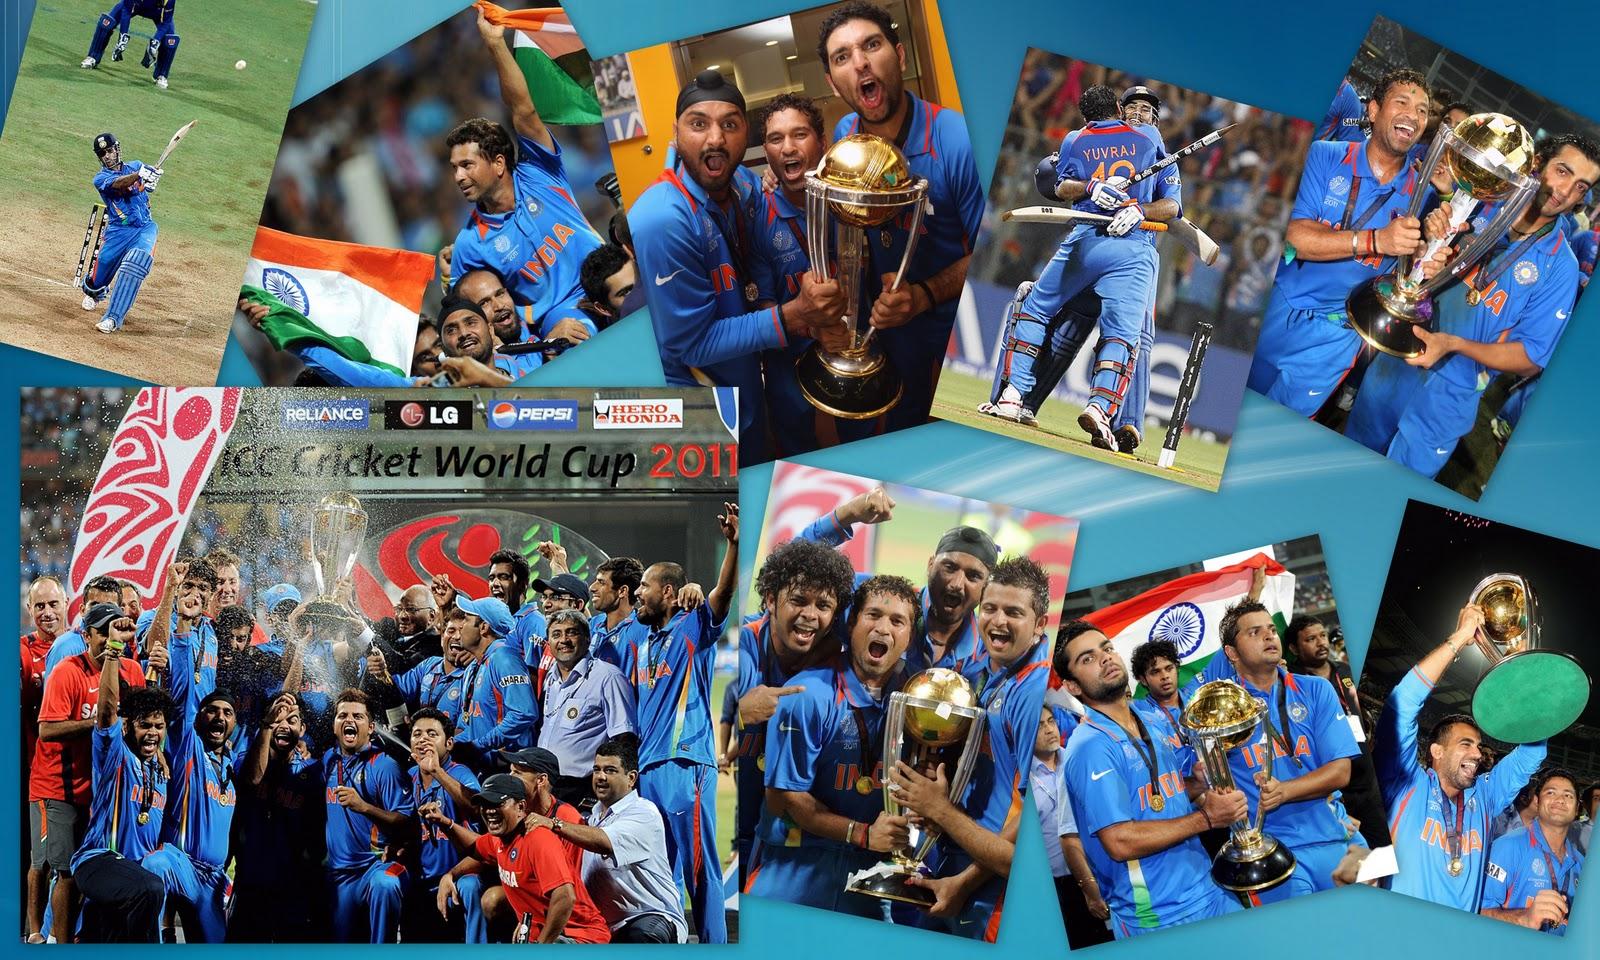 IWCGMC50. Icc World Cup Great Memories Clipart Today:1580834206